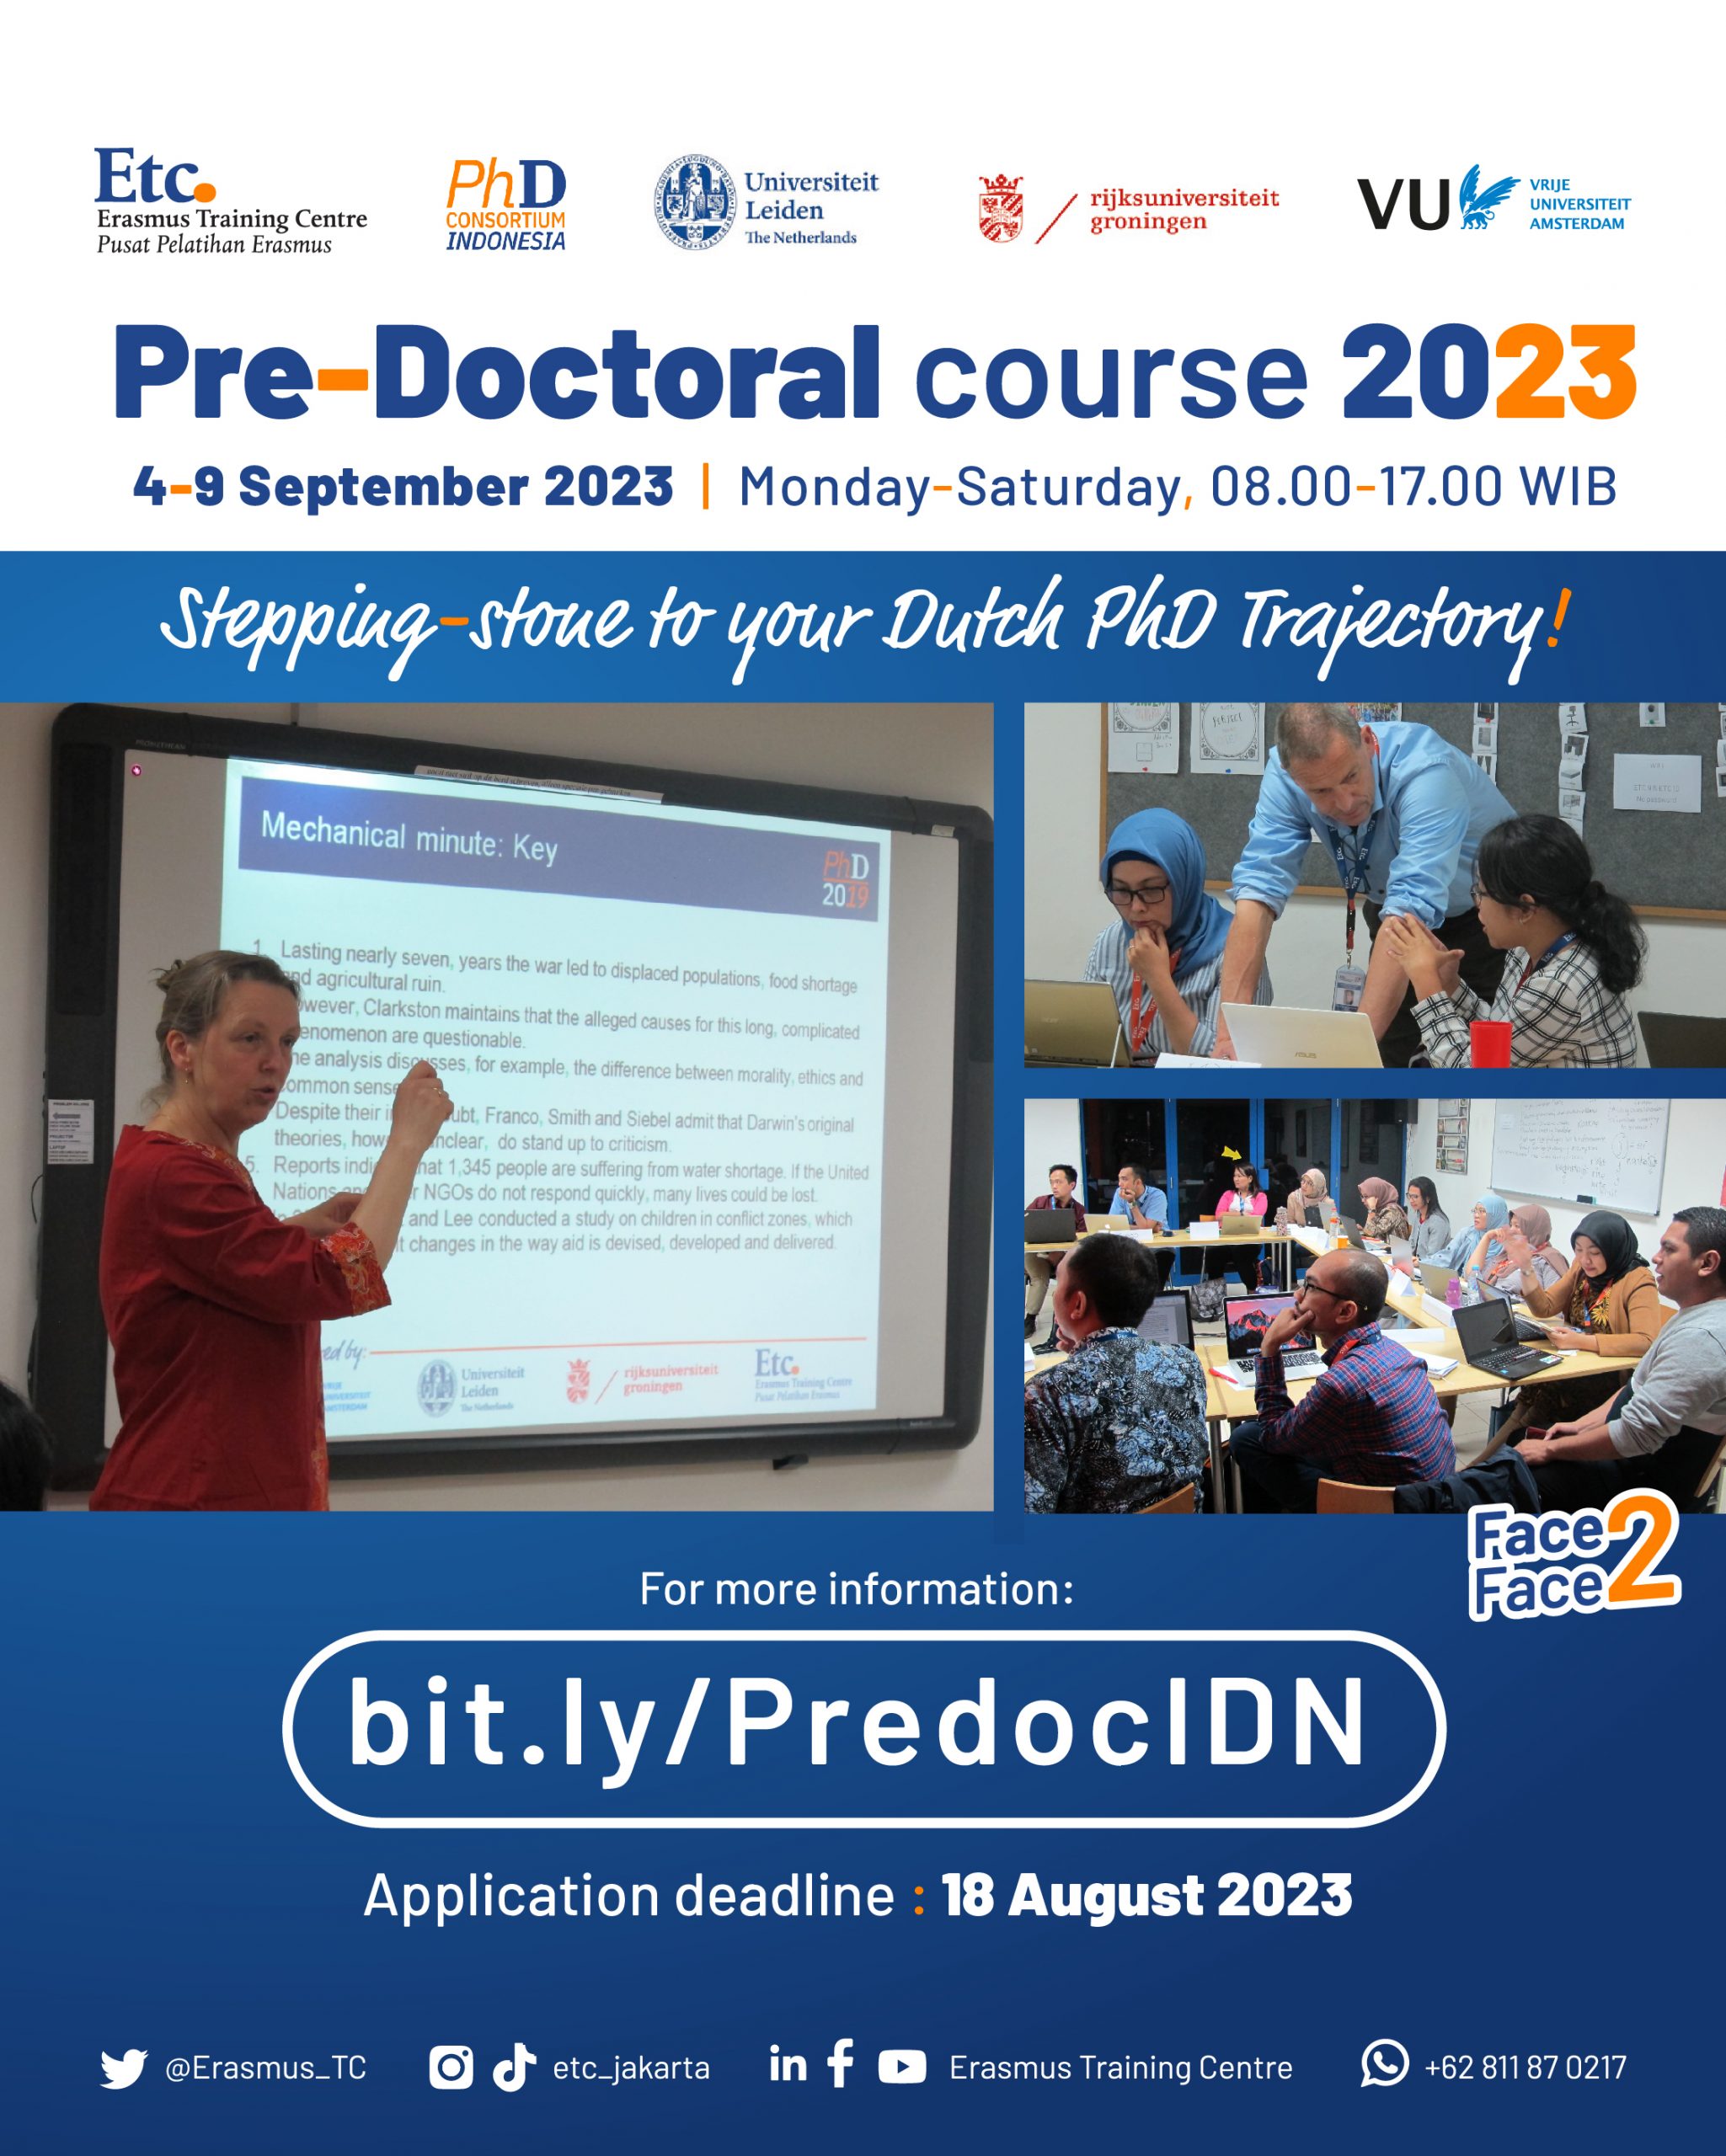 Pre-doctoral face-to-face training programme